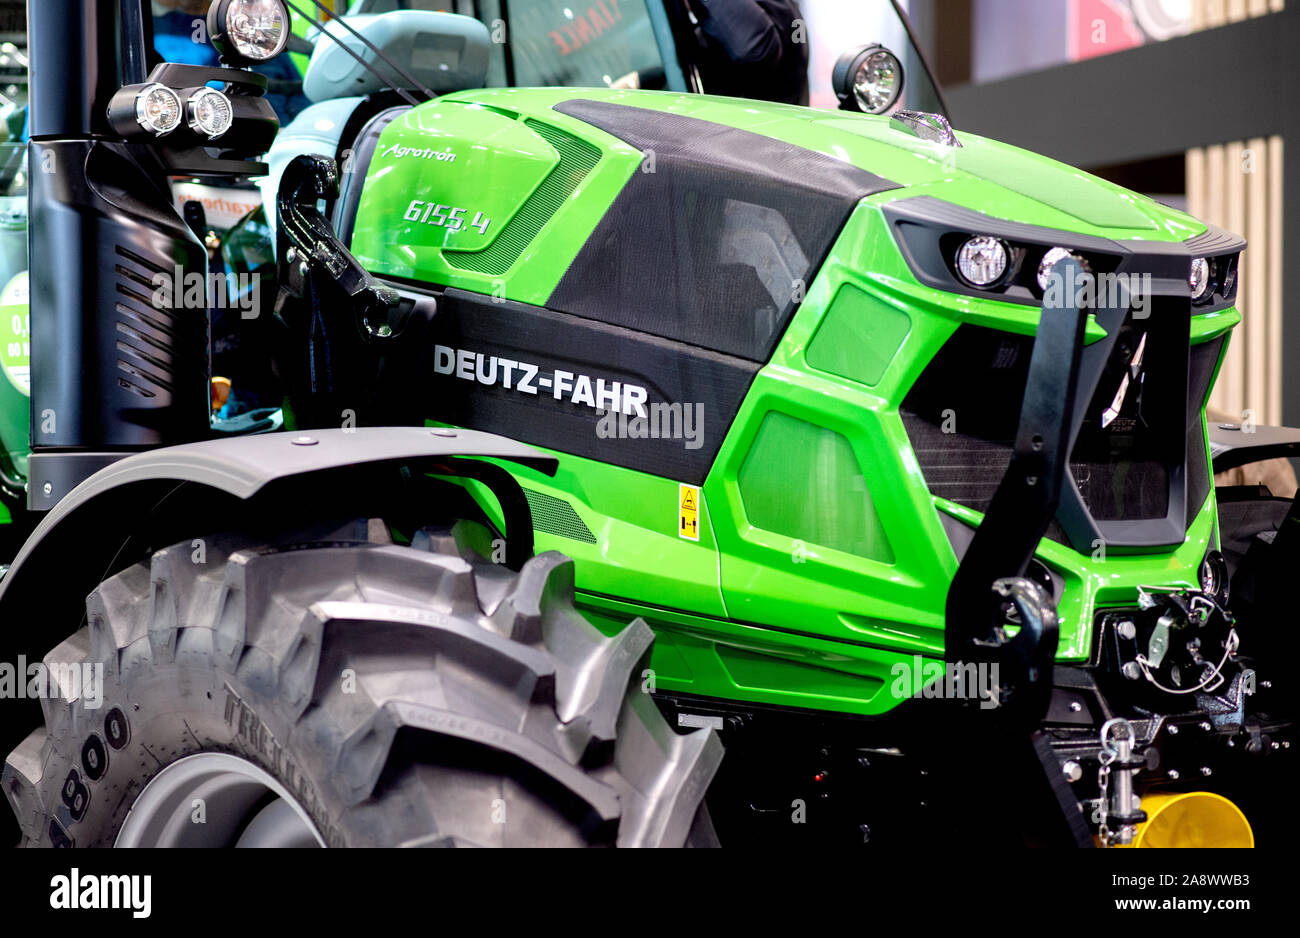 Hanover, Germany. 11th Nov, 2019. A tractor of the type 'Agrotron 6155.4' stands at the Deutz-Fahr stand at the Agritechnica agricultural technology fair in Hanover. Around 2,800 exhibitors will be presenting their latest products at the international exhibition for agricultural machinery from 10 to 16 November. Credit: Hauke-Christian Dittrich/dpa/Alamy Live News Stock Photo